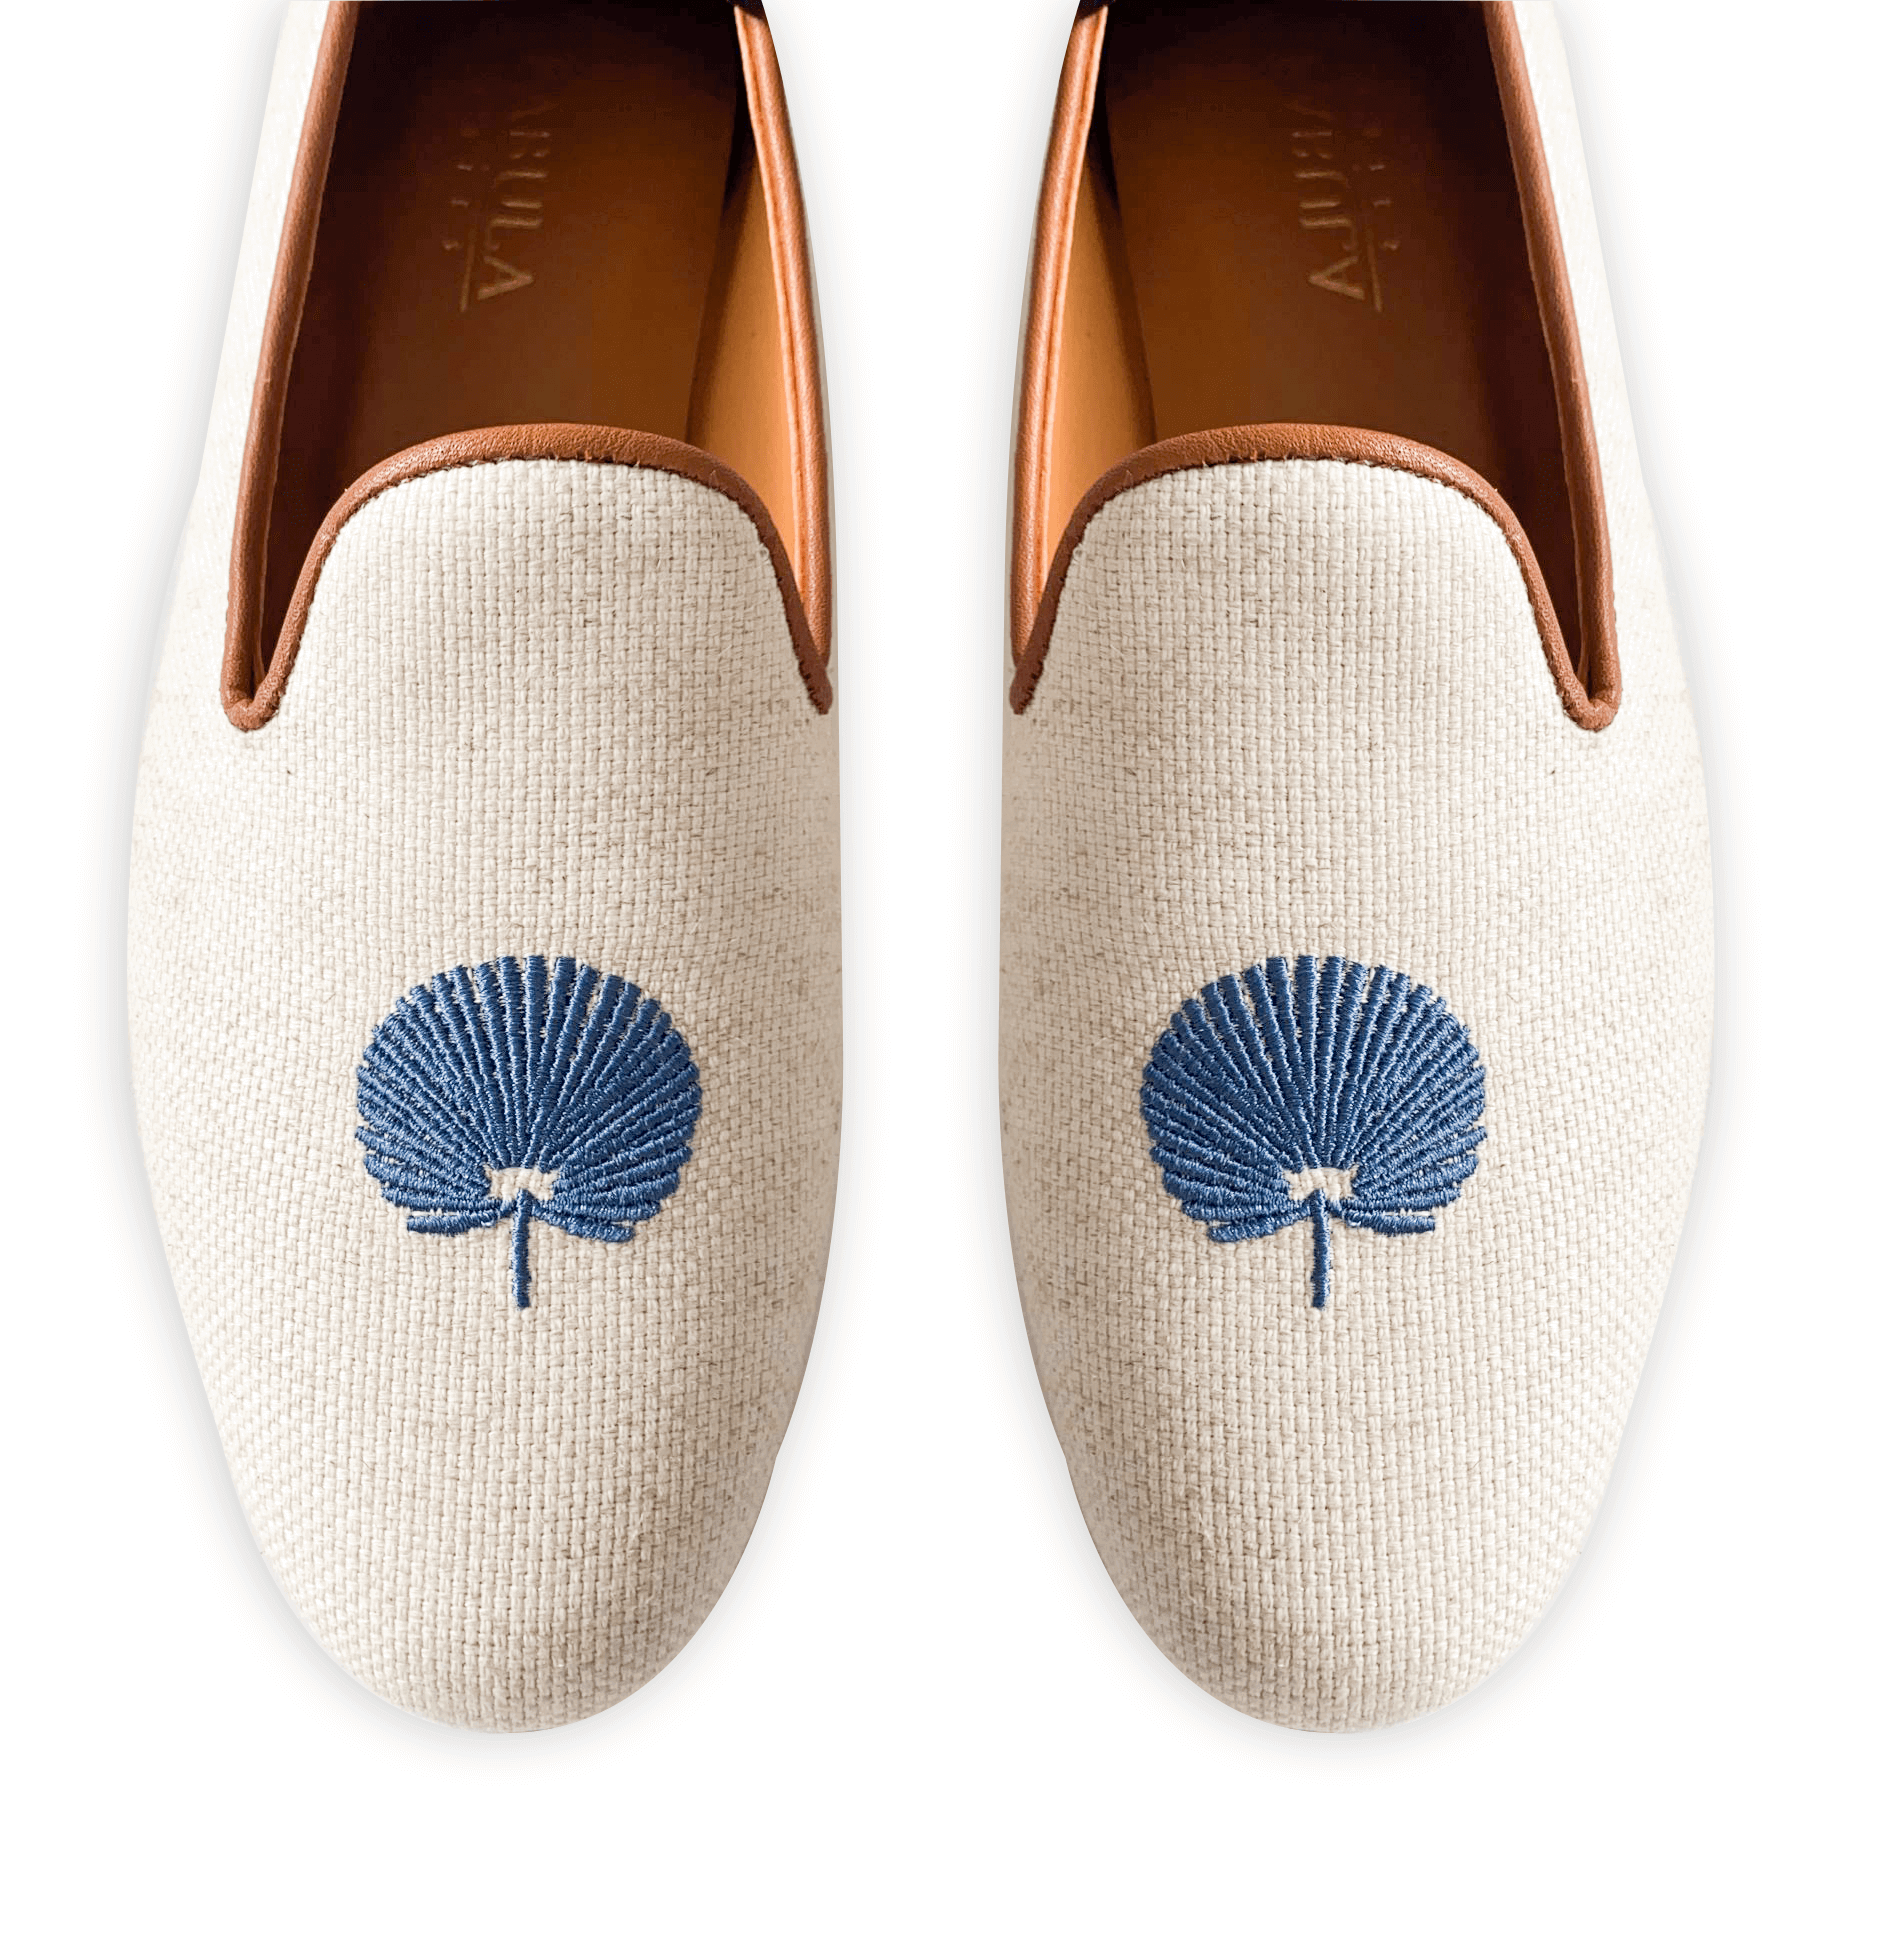 Beige linen slippers with brown leather trimming, navy embroidery on top and nubuck leather sole.